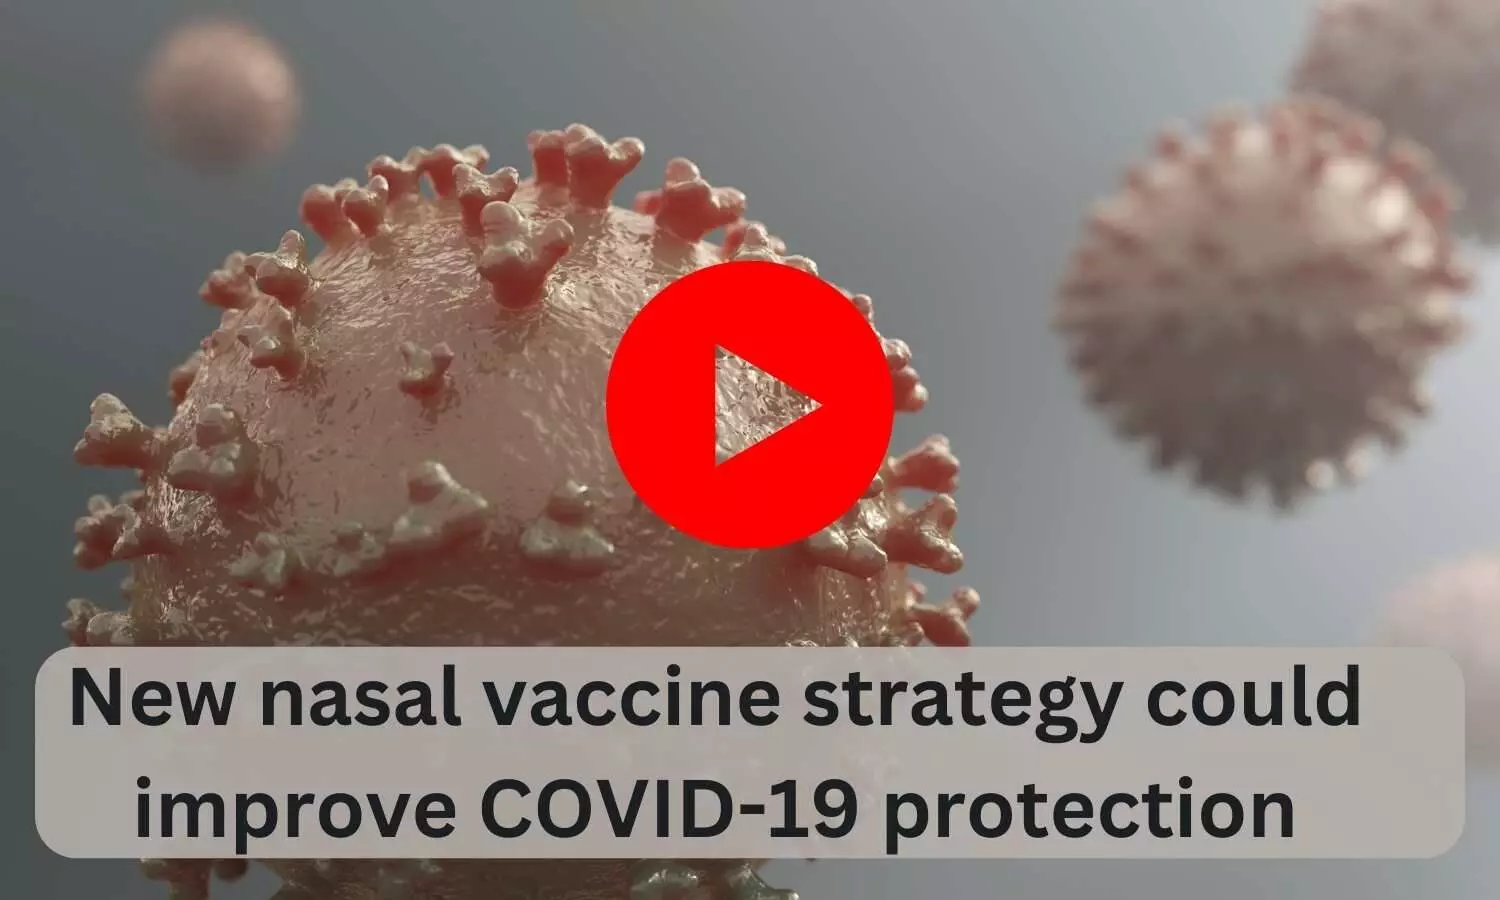 New nasal vaccine strategy could improve COVID-19 protection